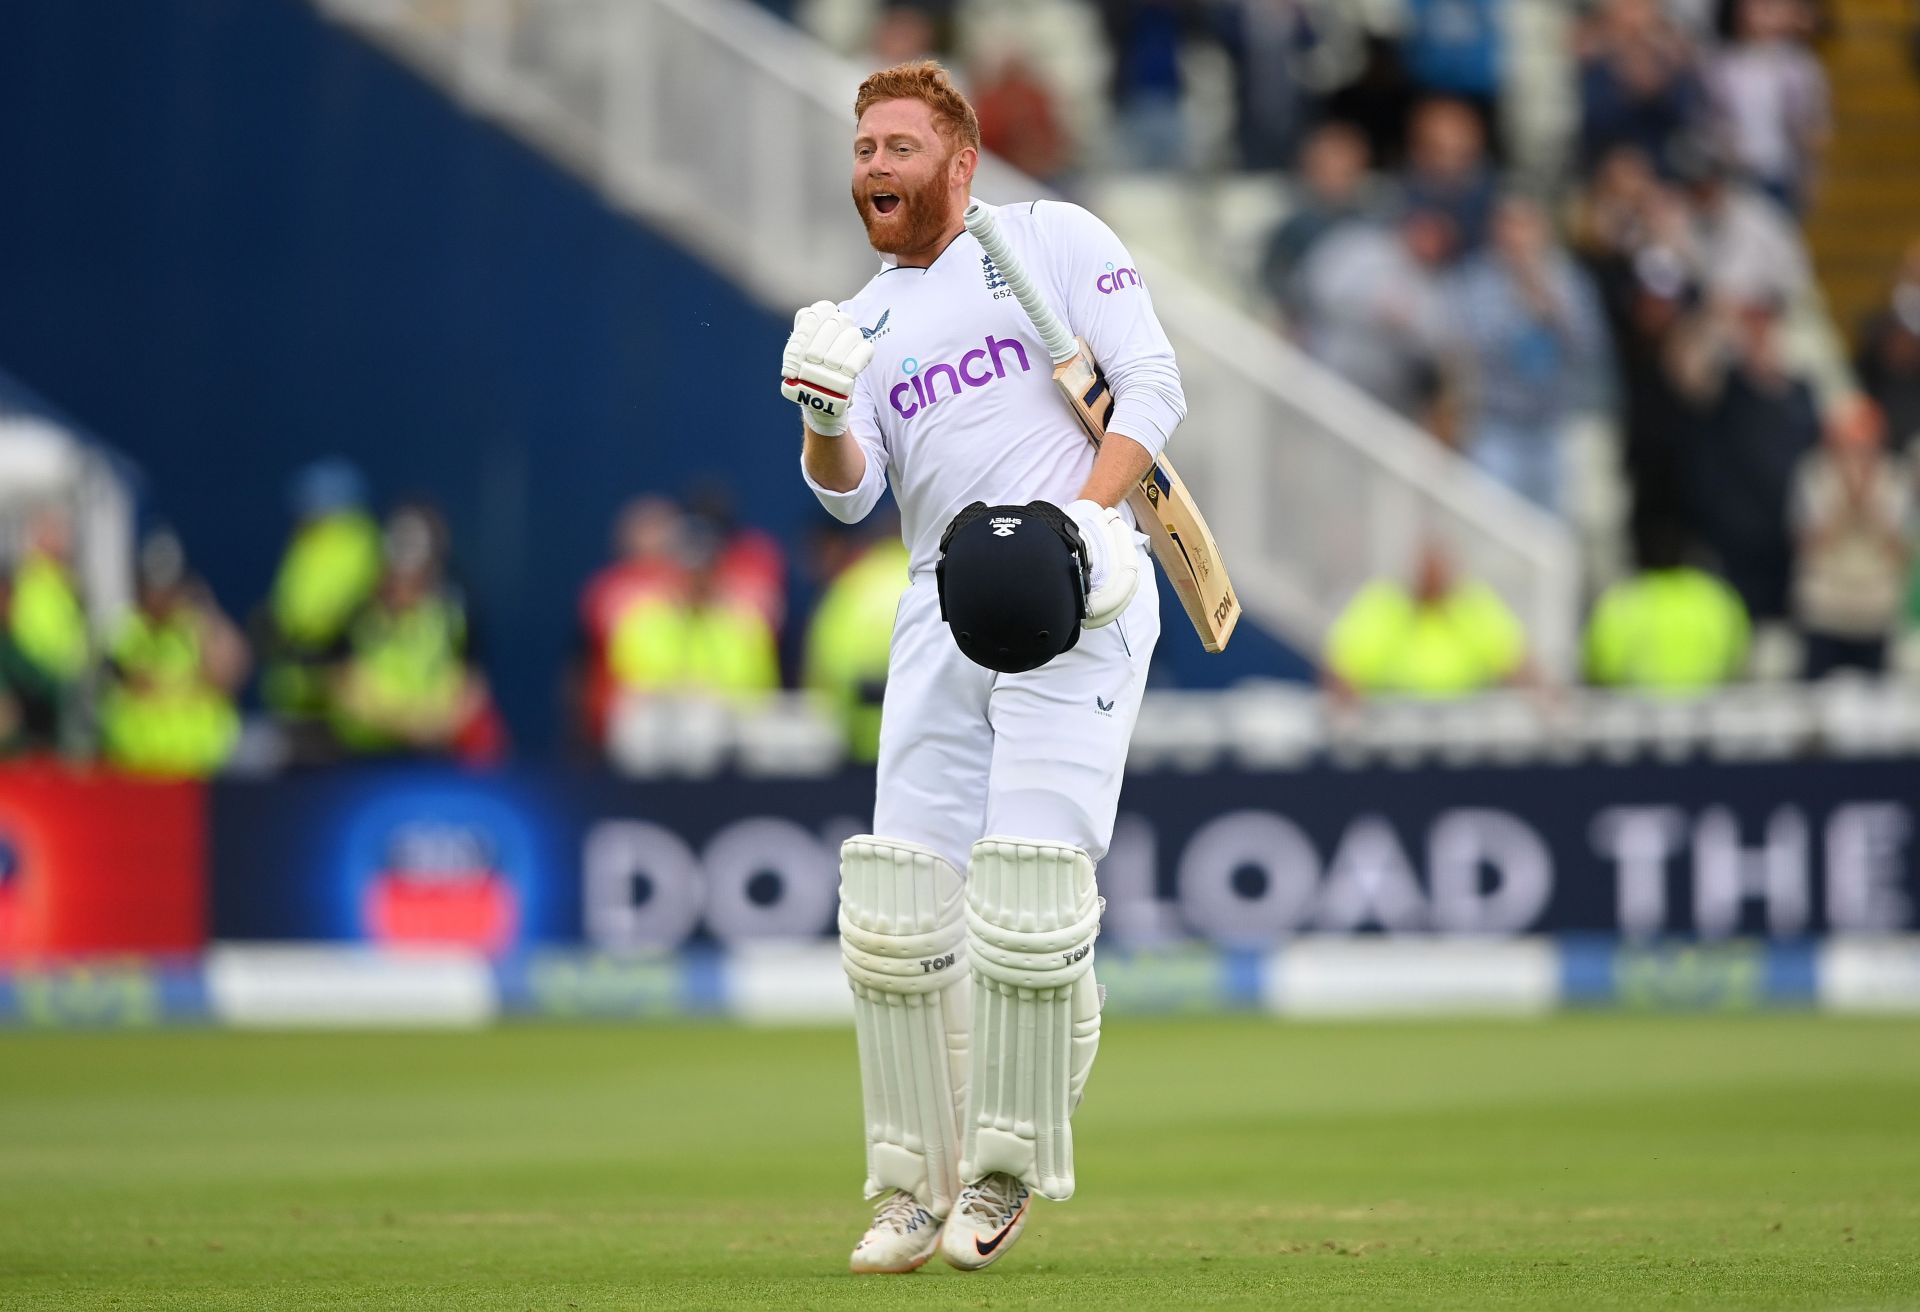 Jonny Bairstow made the difference with twin centuries at Edgbaston.